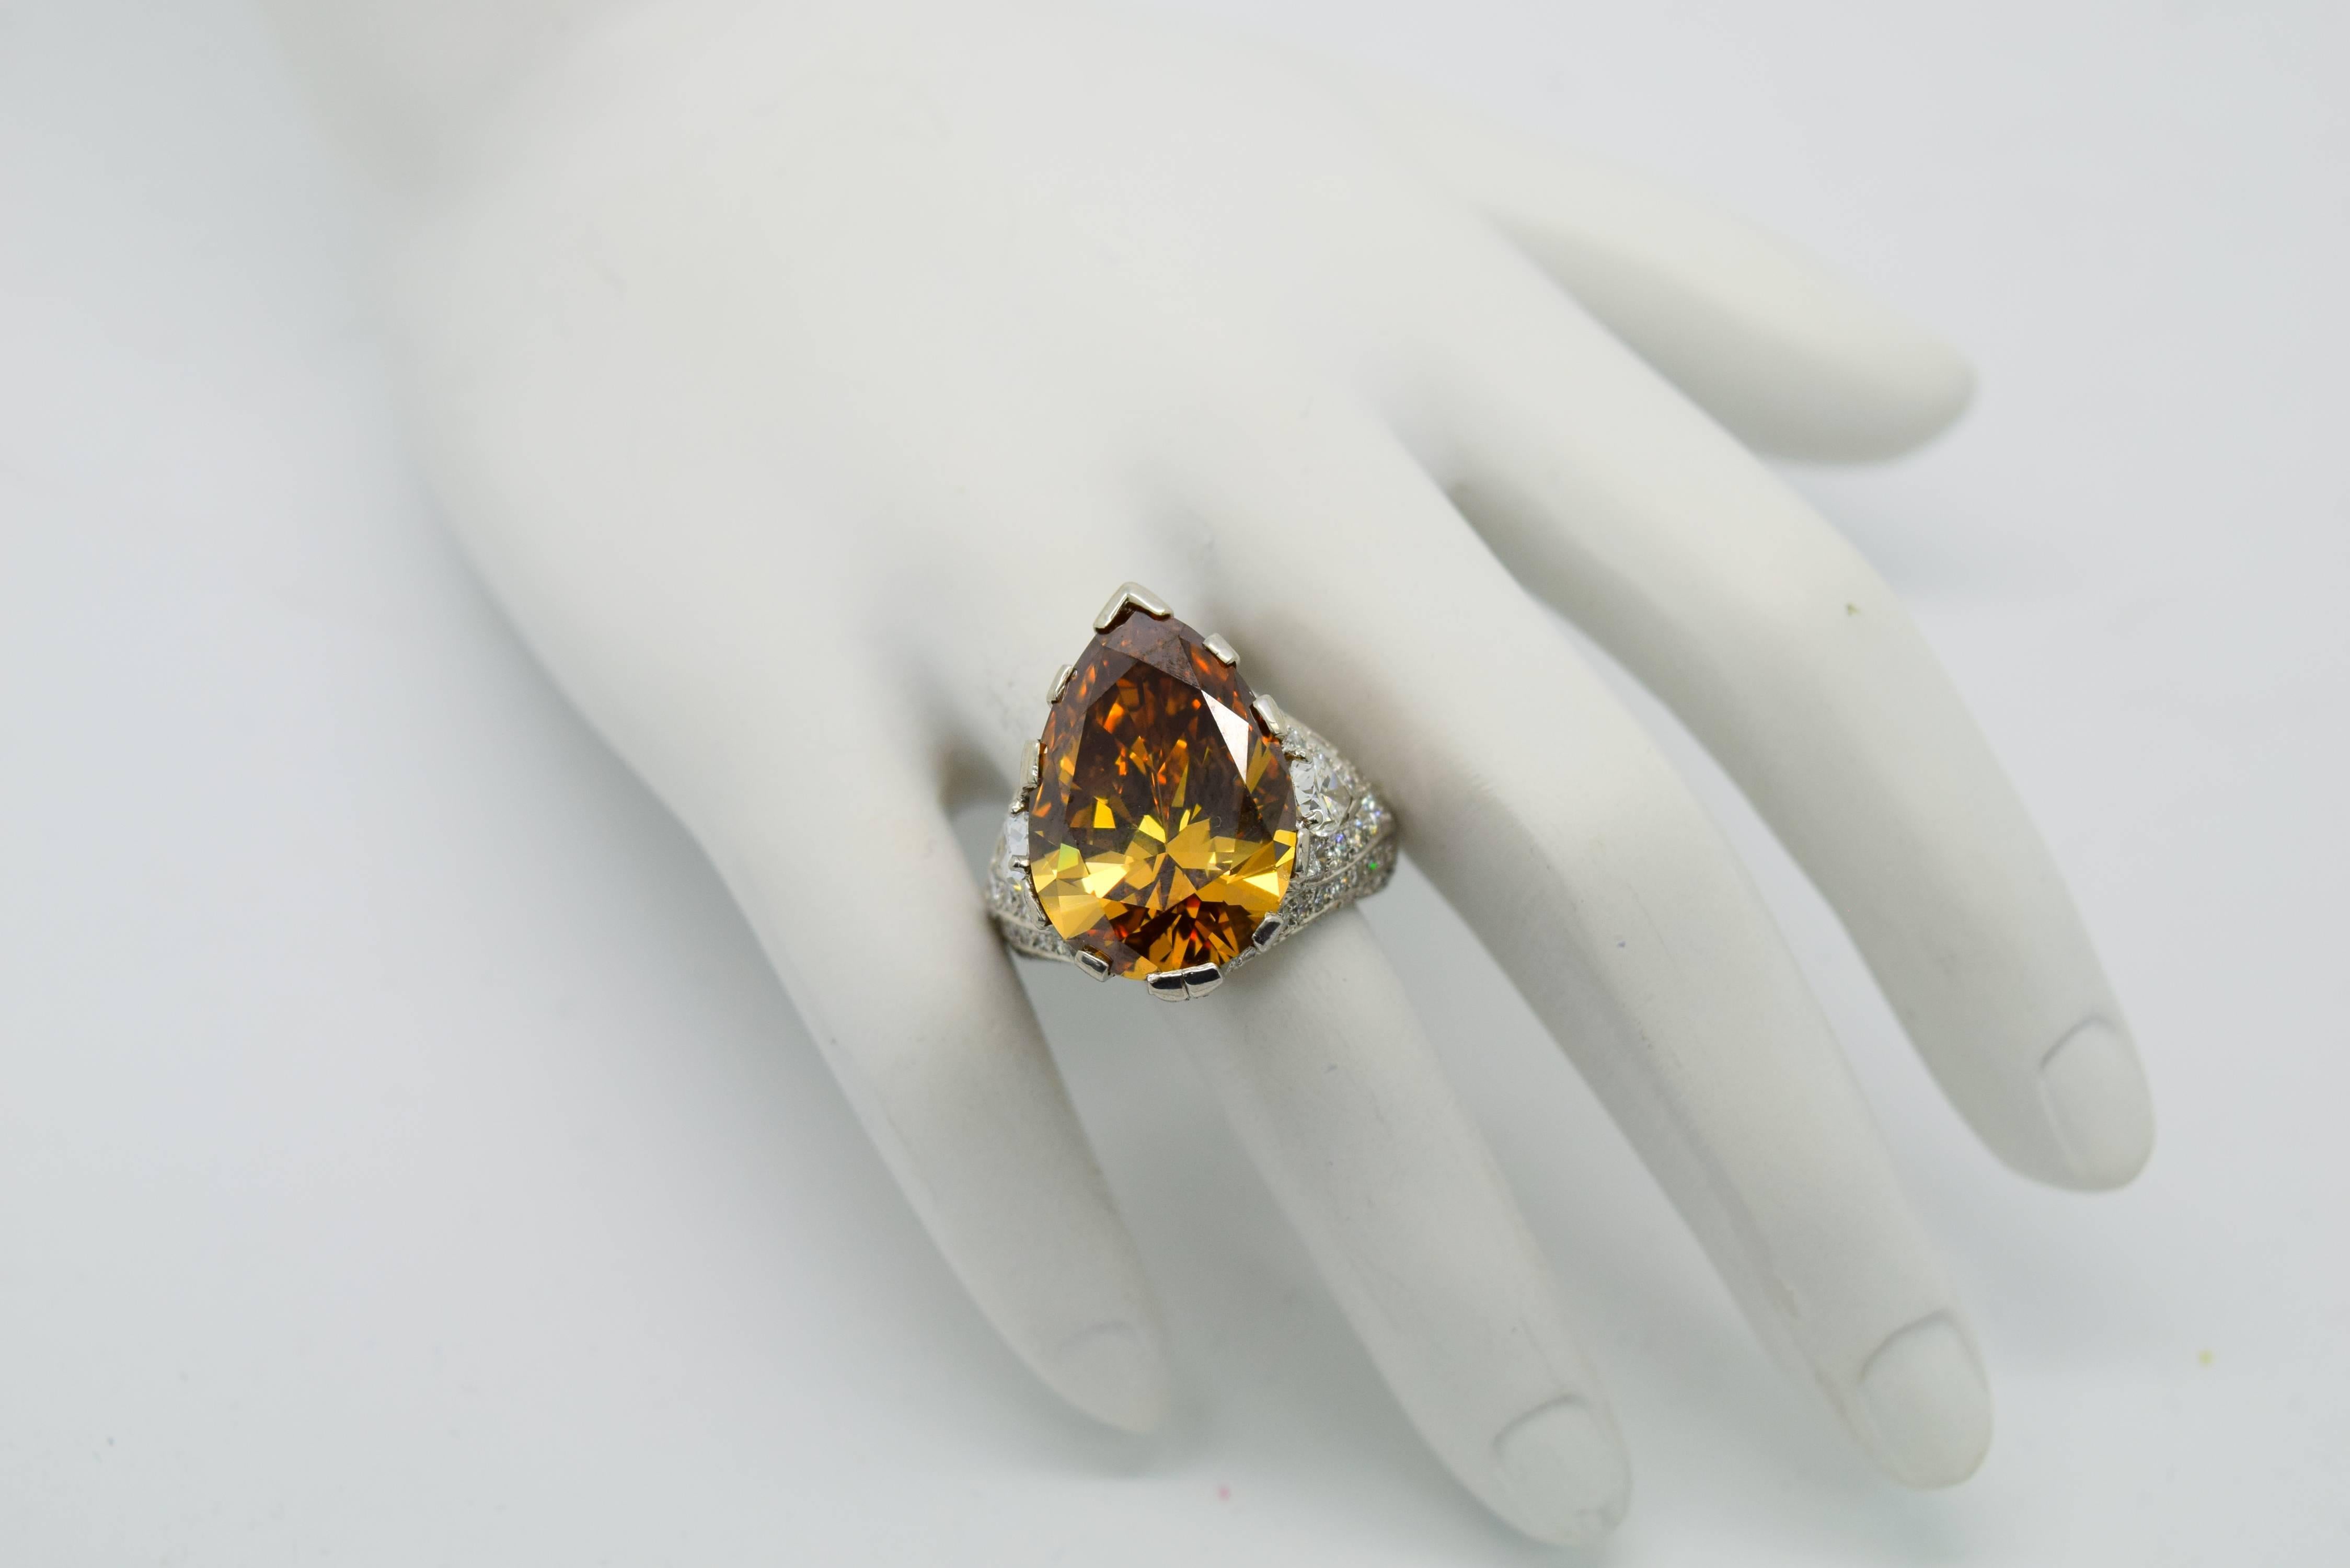 Extraordinary GIA 10.75 carat Fancy Brown Pear Shape Diamond Cocktail Ring For Sale 1